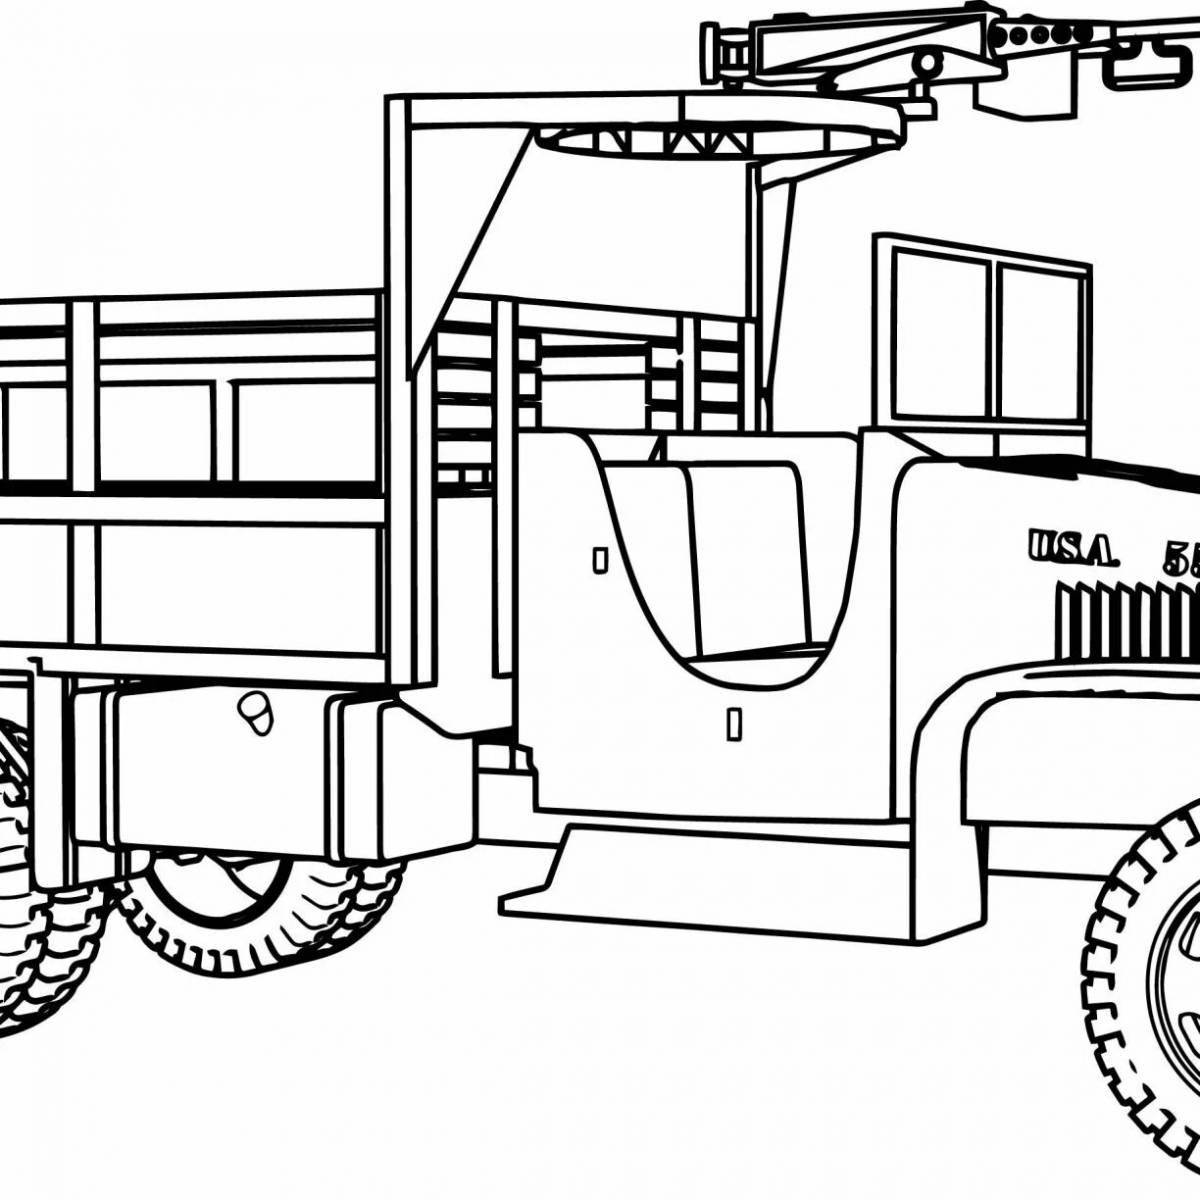 Coloring page charming Ural military